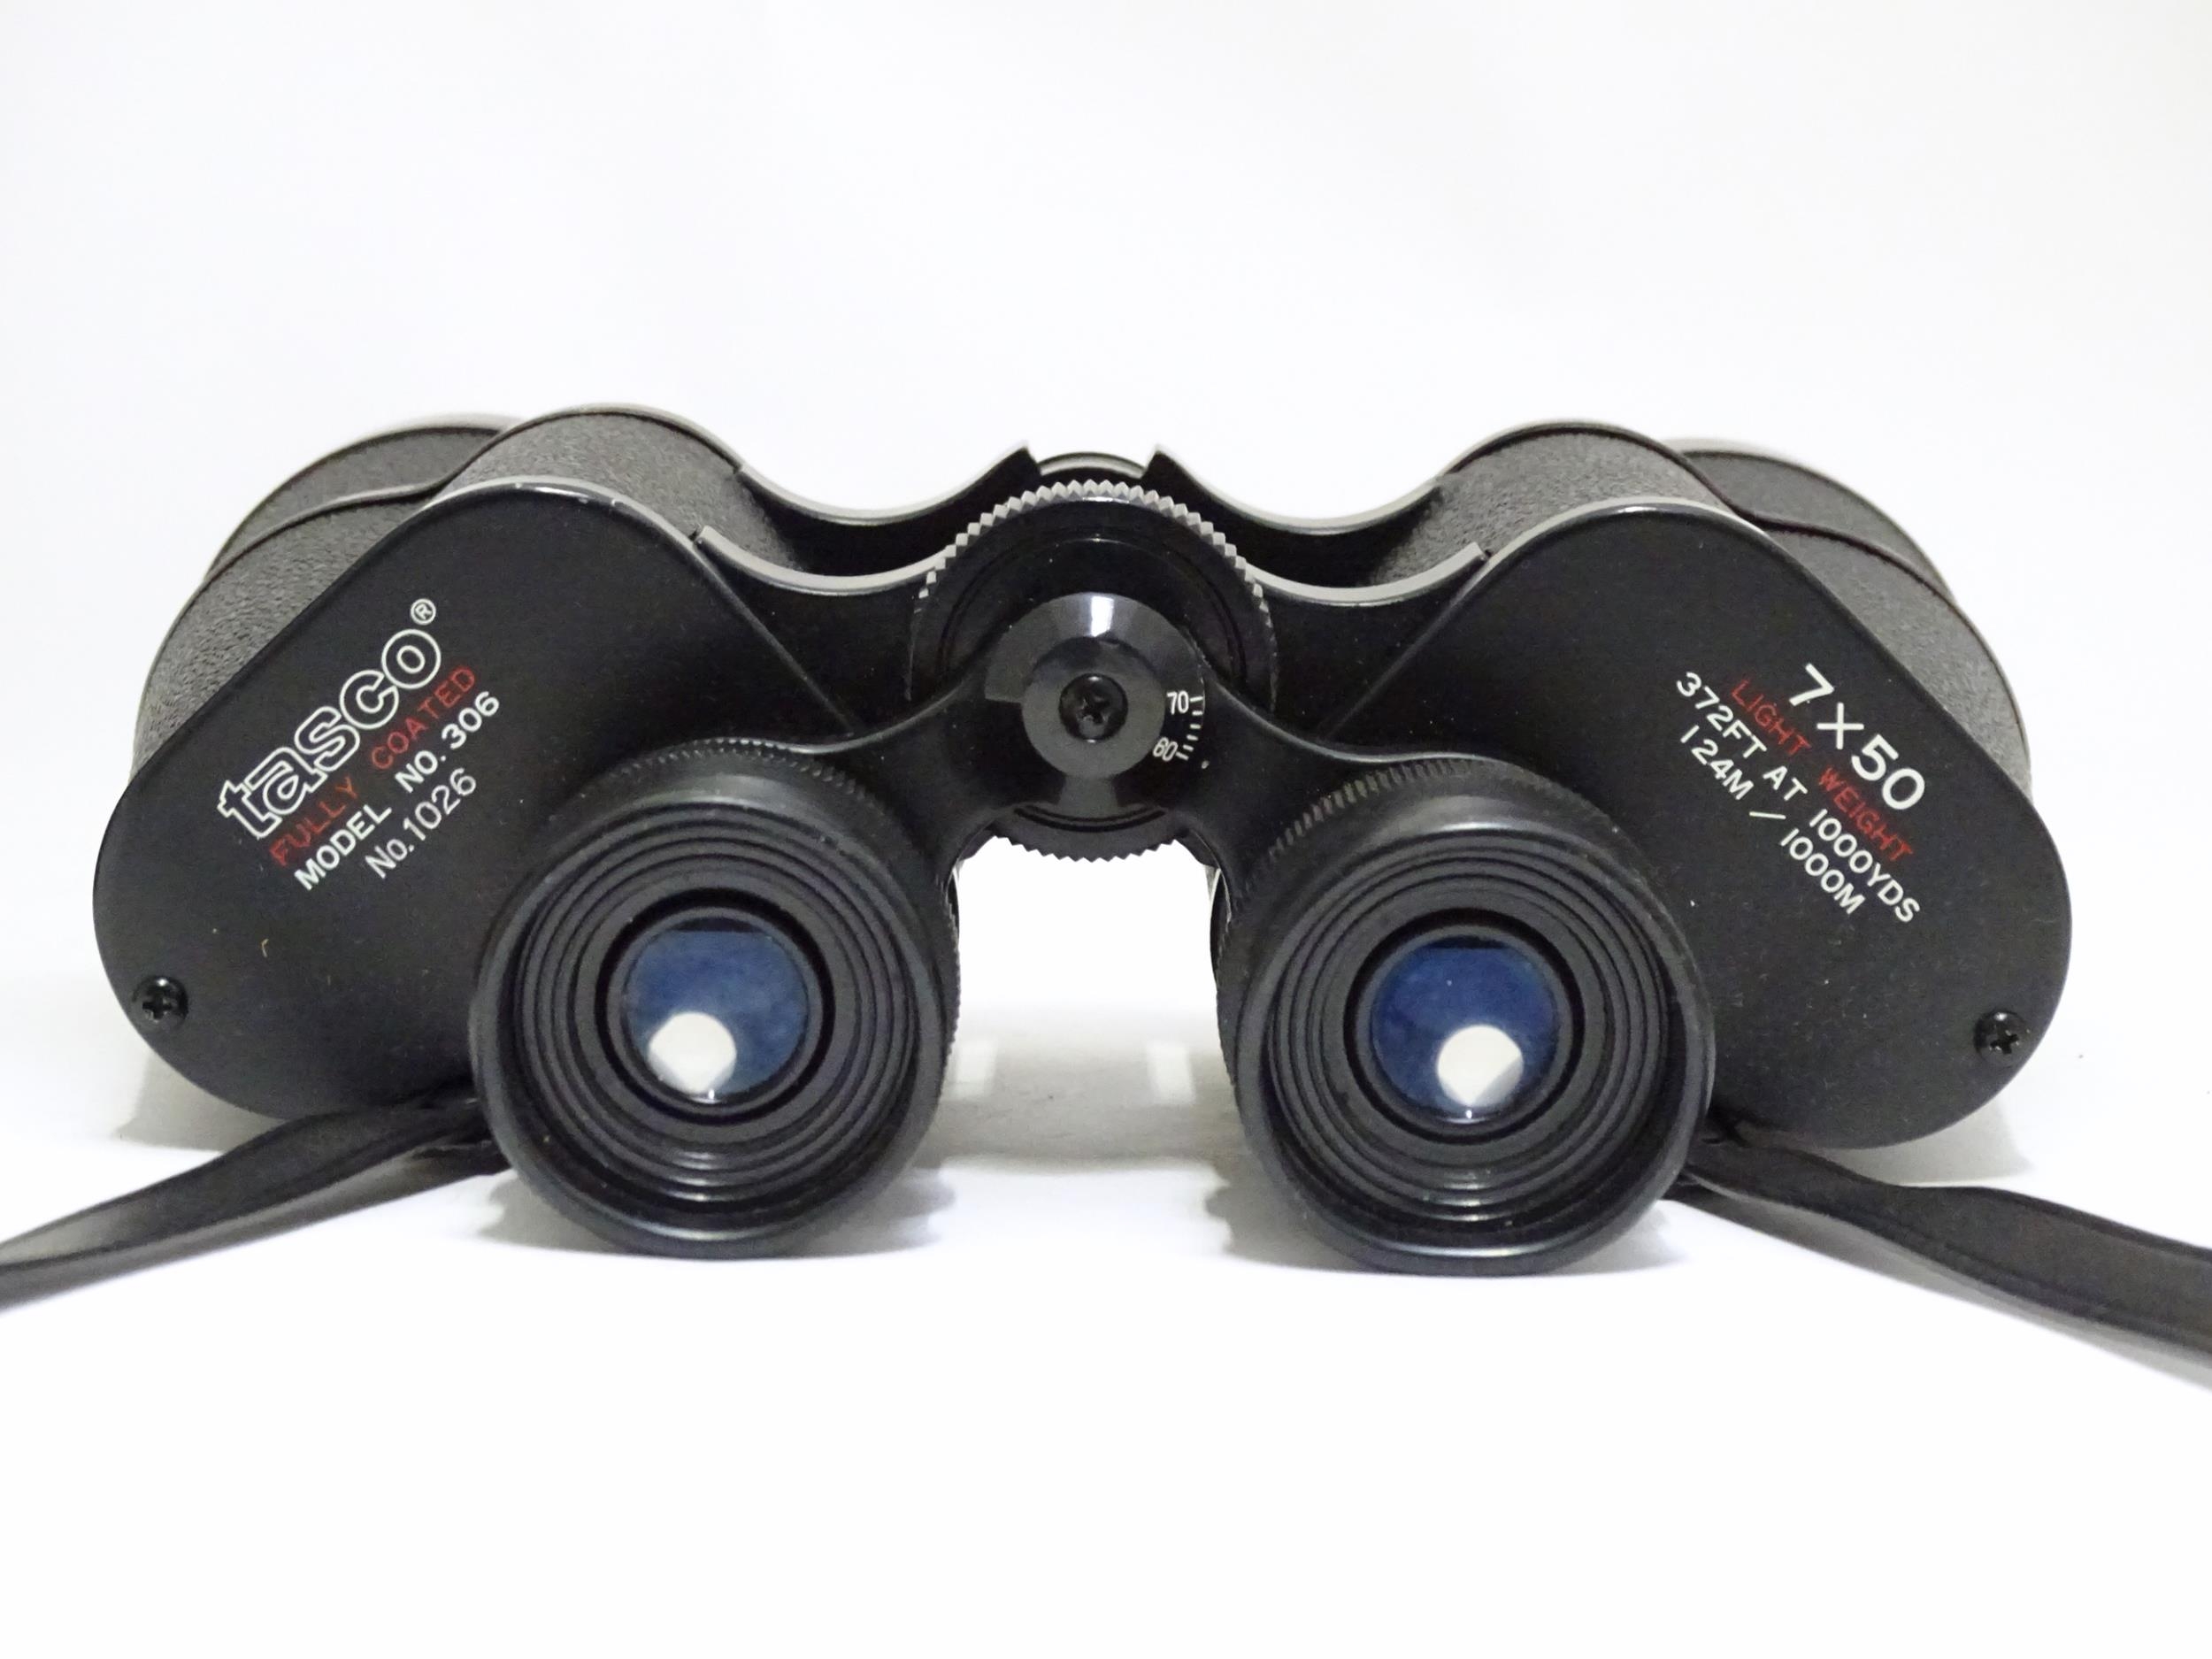 Tasco Binoculars 306,no.1026 Please Note - we do not make reference to the condition of lots - Image 3 of 6